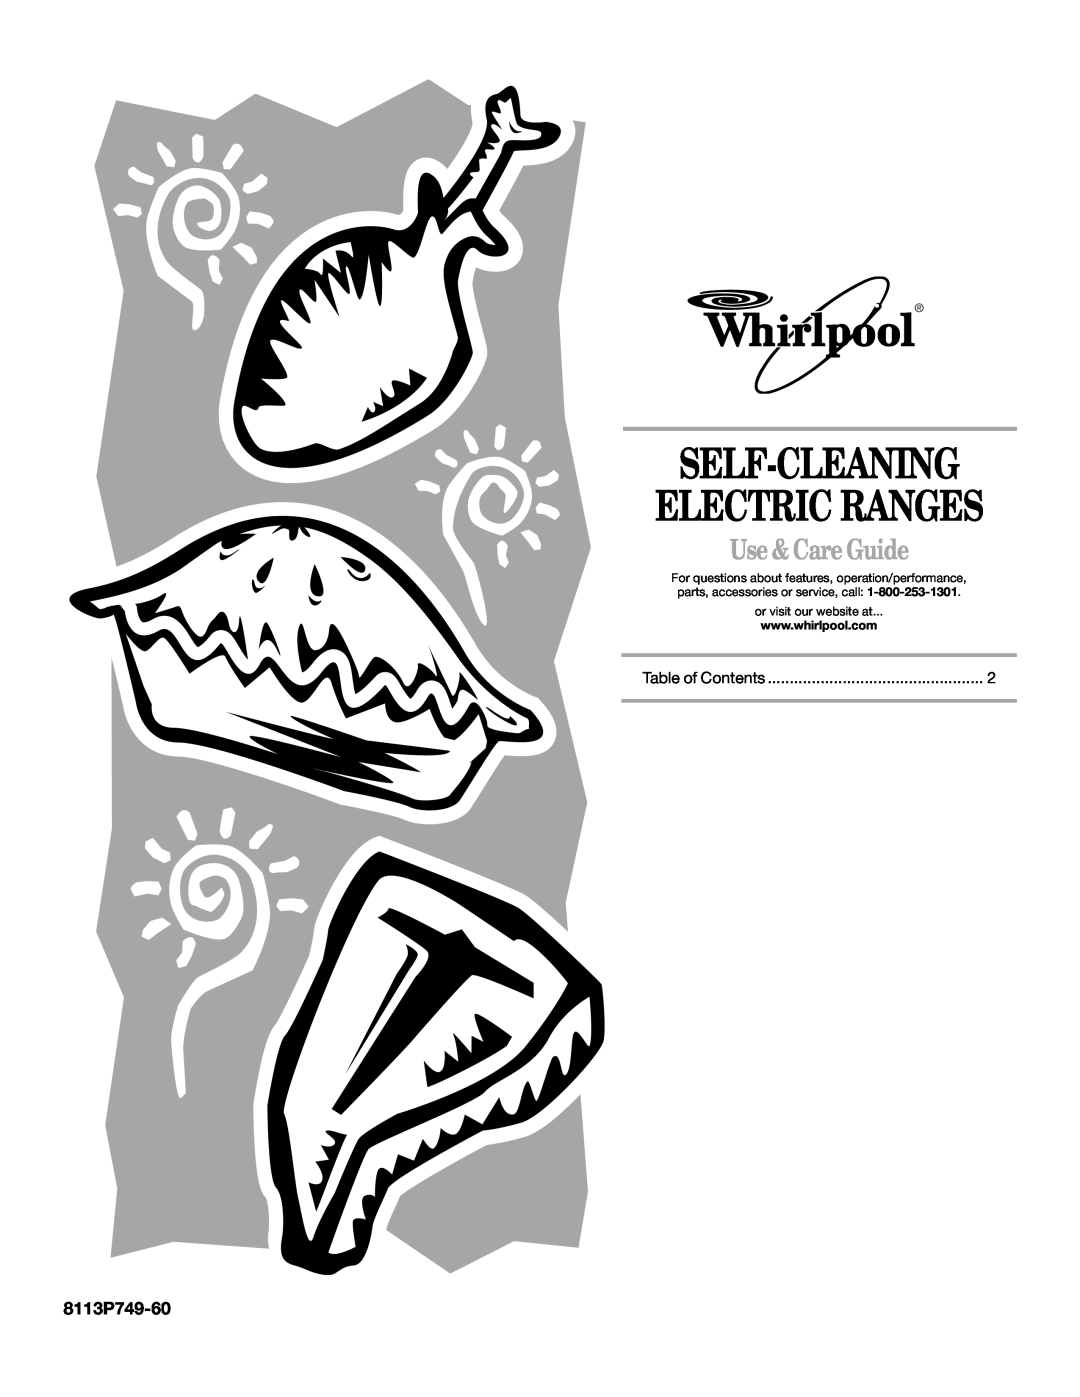 Whirlpool 8113P749-60 manual Self-Cleaning Electric Ranges, Use & Care Guide, or visit our website at 